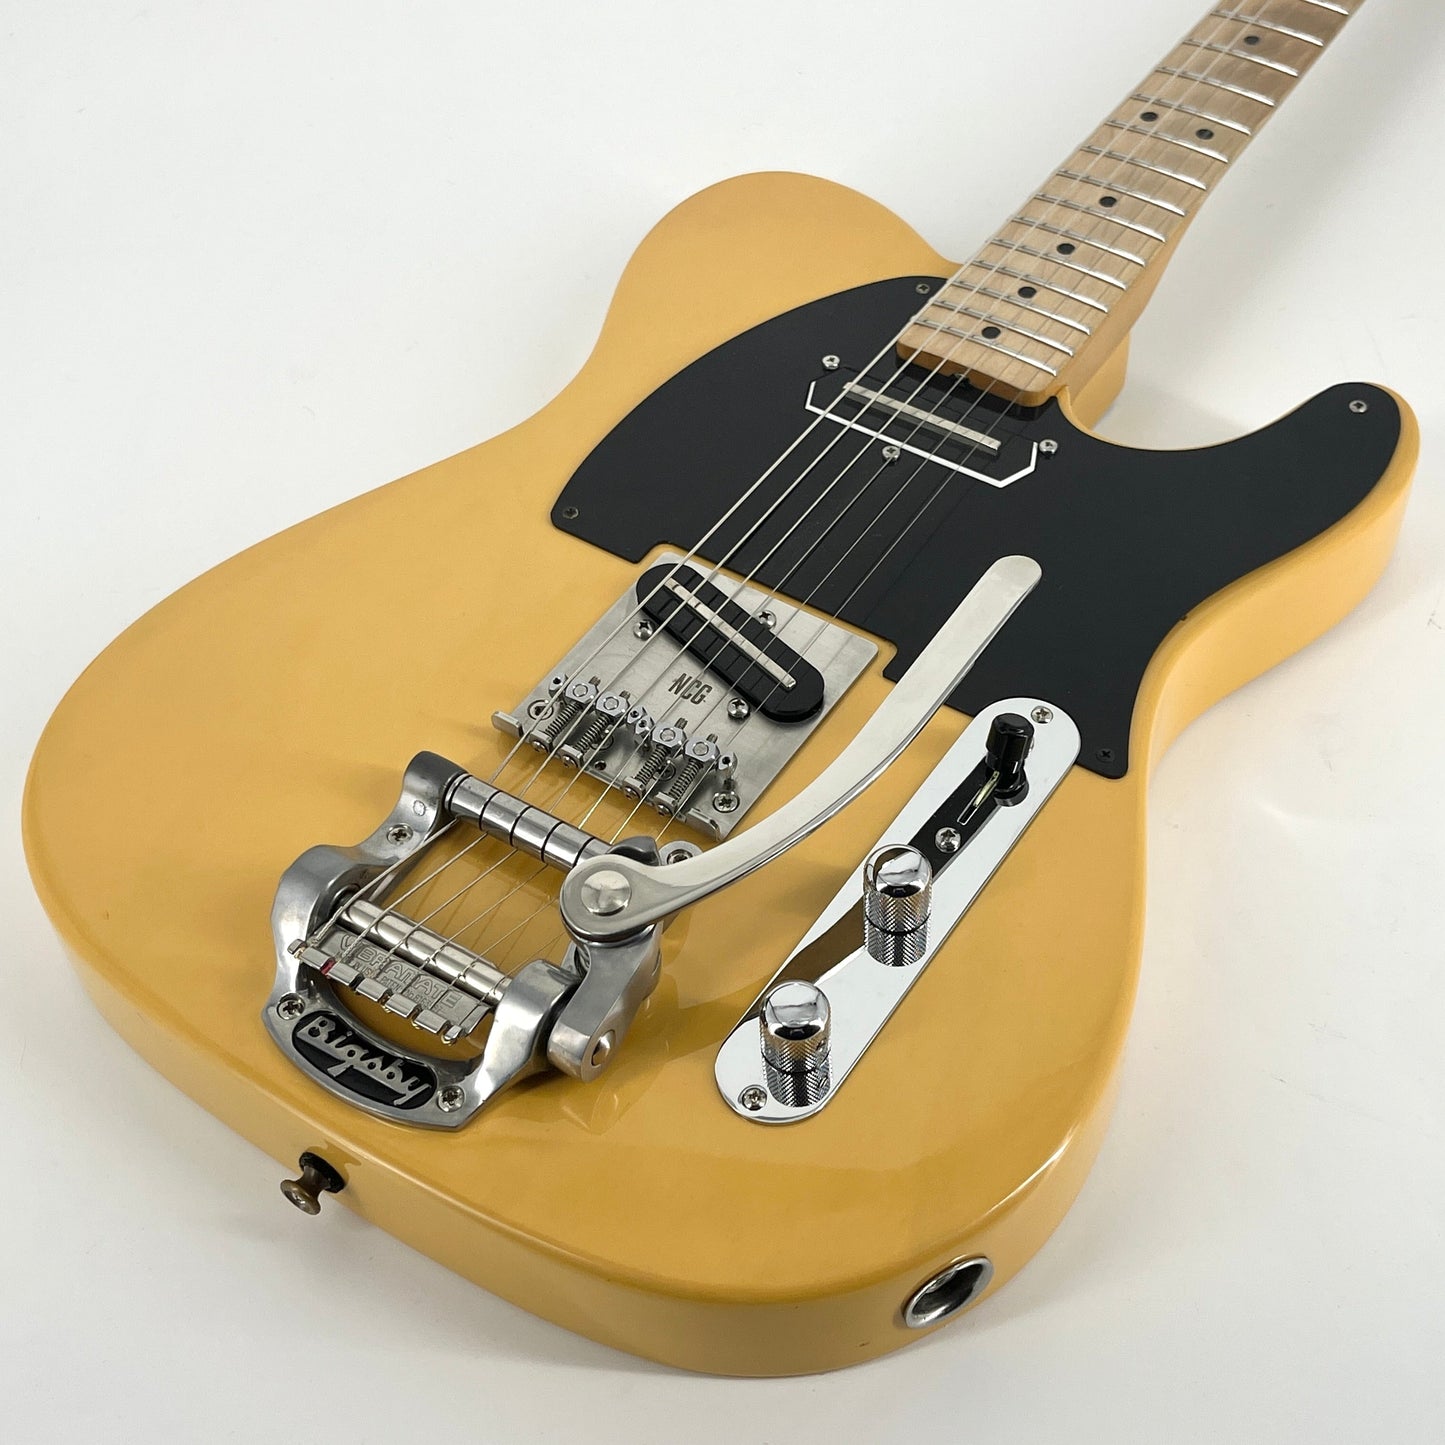 2011 Fender Classic Player Baja 50's Telecaster with Mods – Butterscotch Blonde